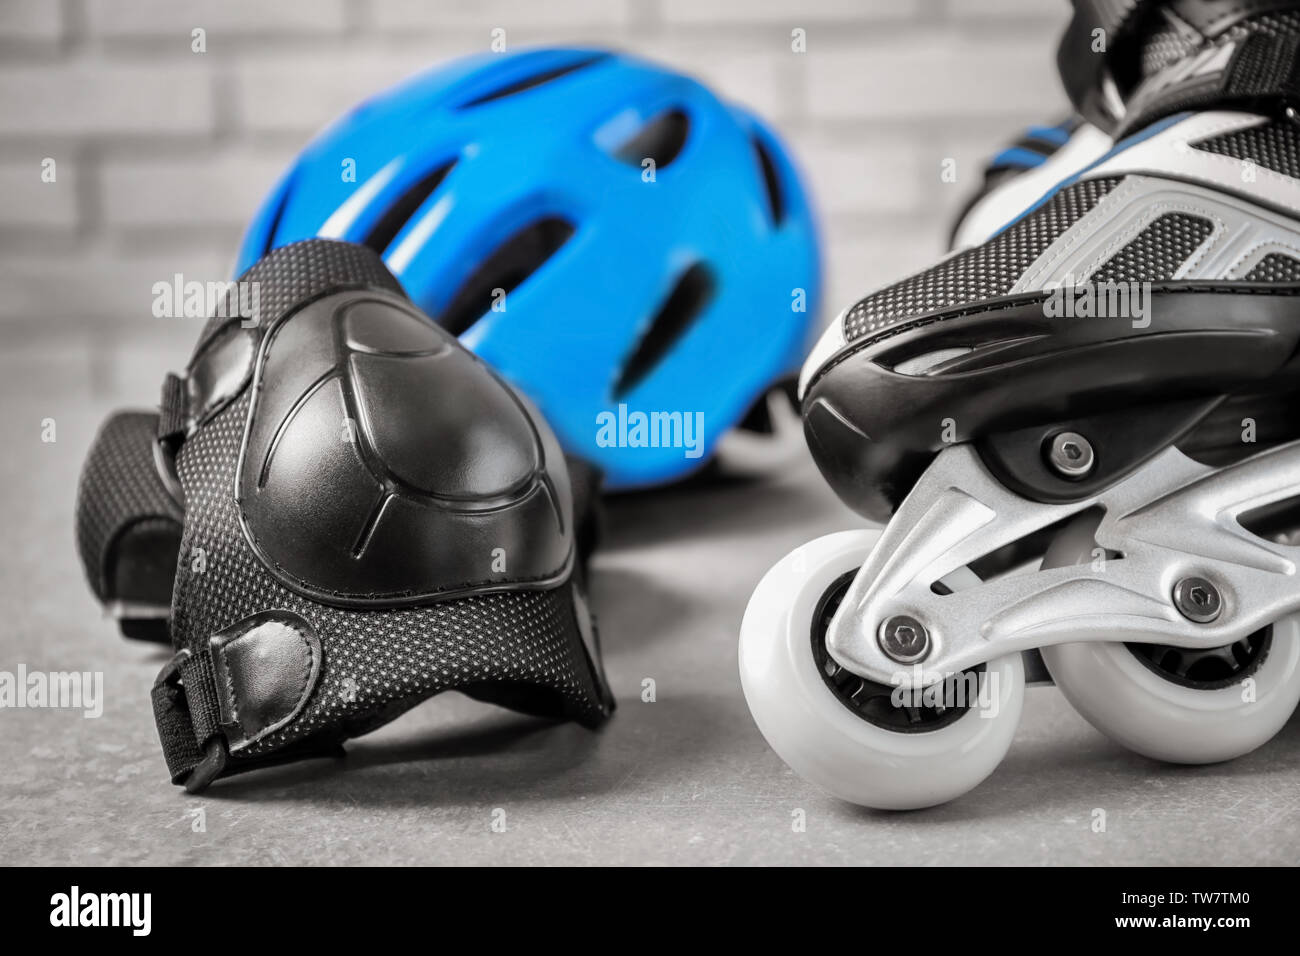 Roller skate and knee pad on floor, closeup Stock Photo - Alamy